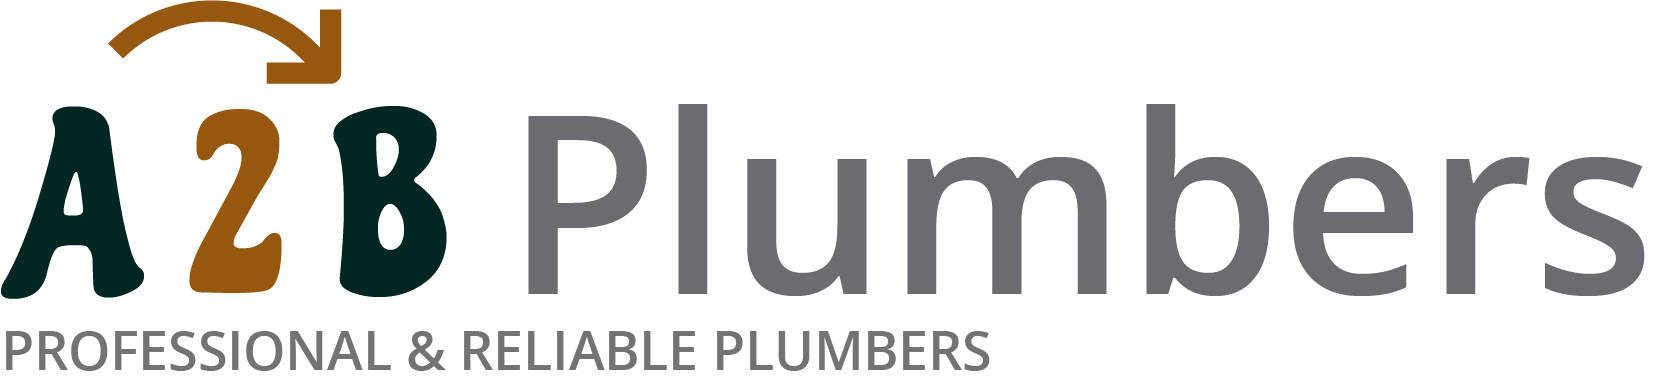 If you need a boiler installed, a radiator repaired or a leaking tap fixed, call us now - we provide services for properties in Surrey Quays and the local area.